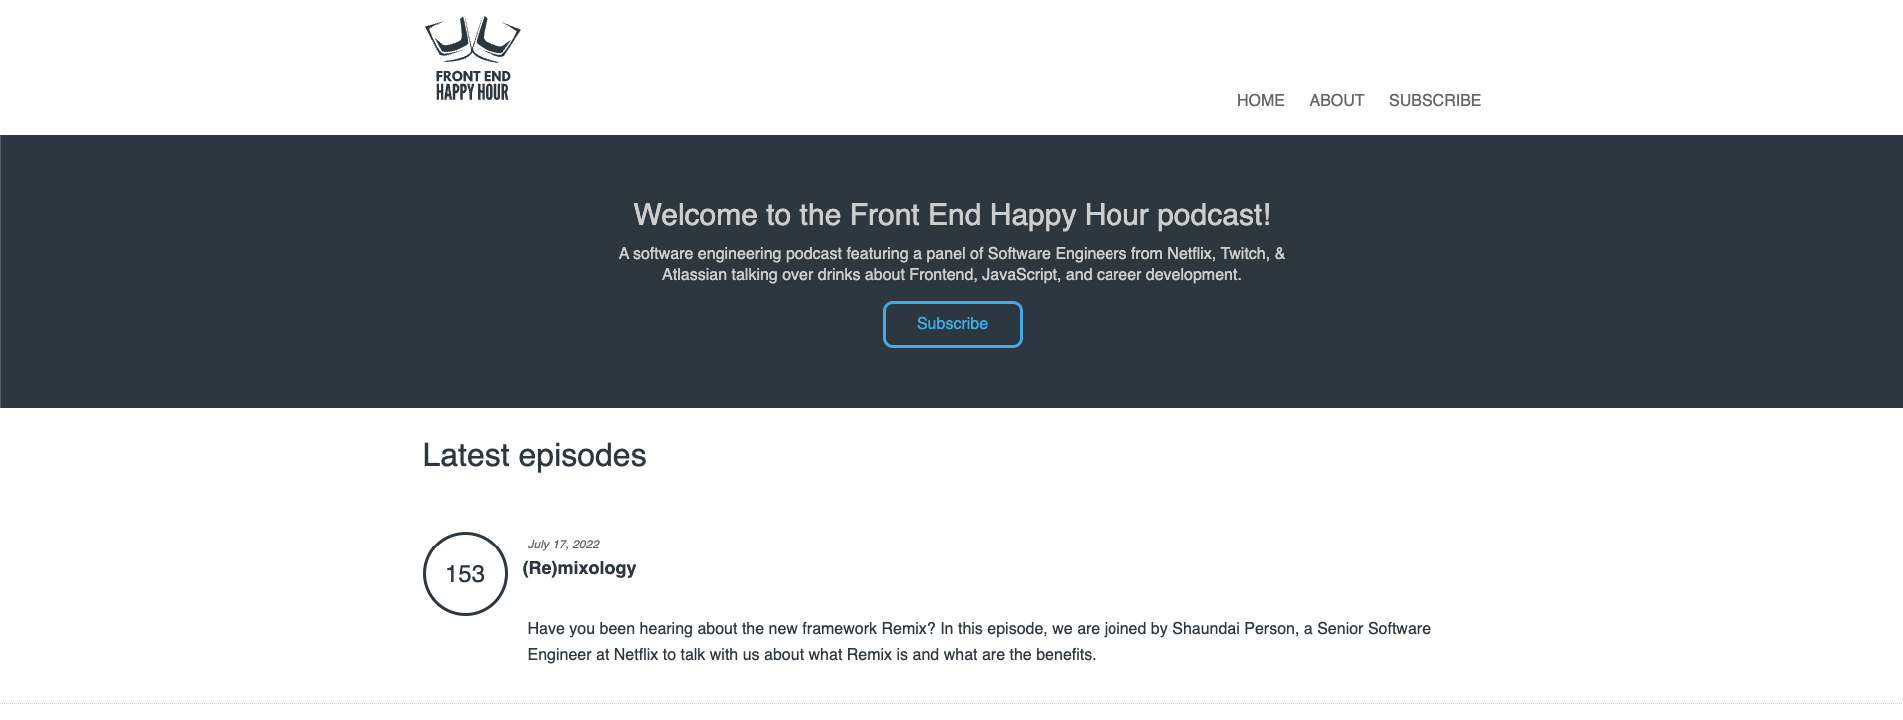 Front End Happy Hour podcast